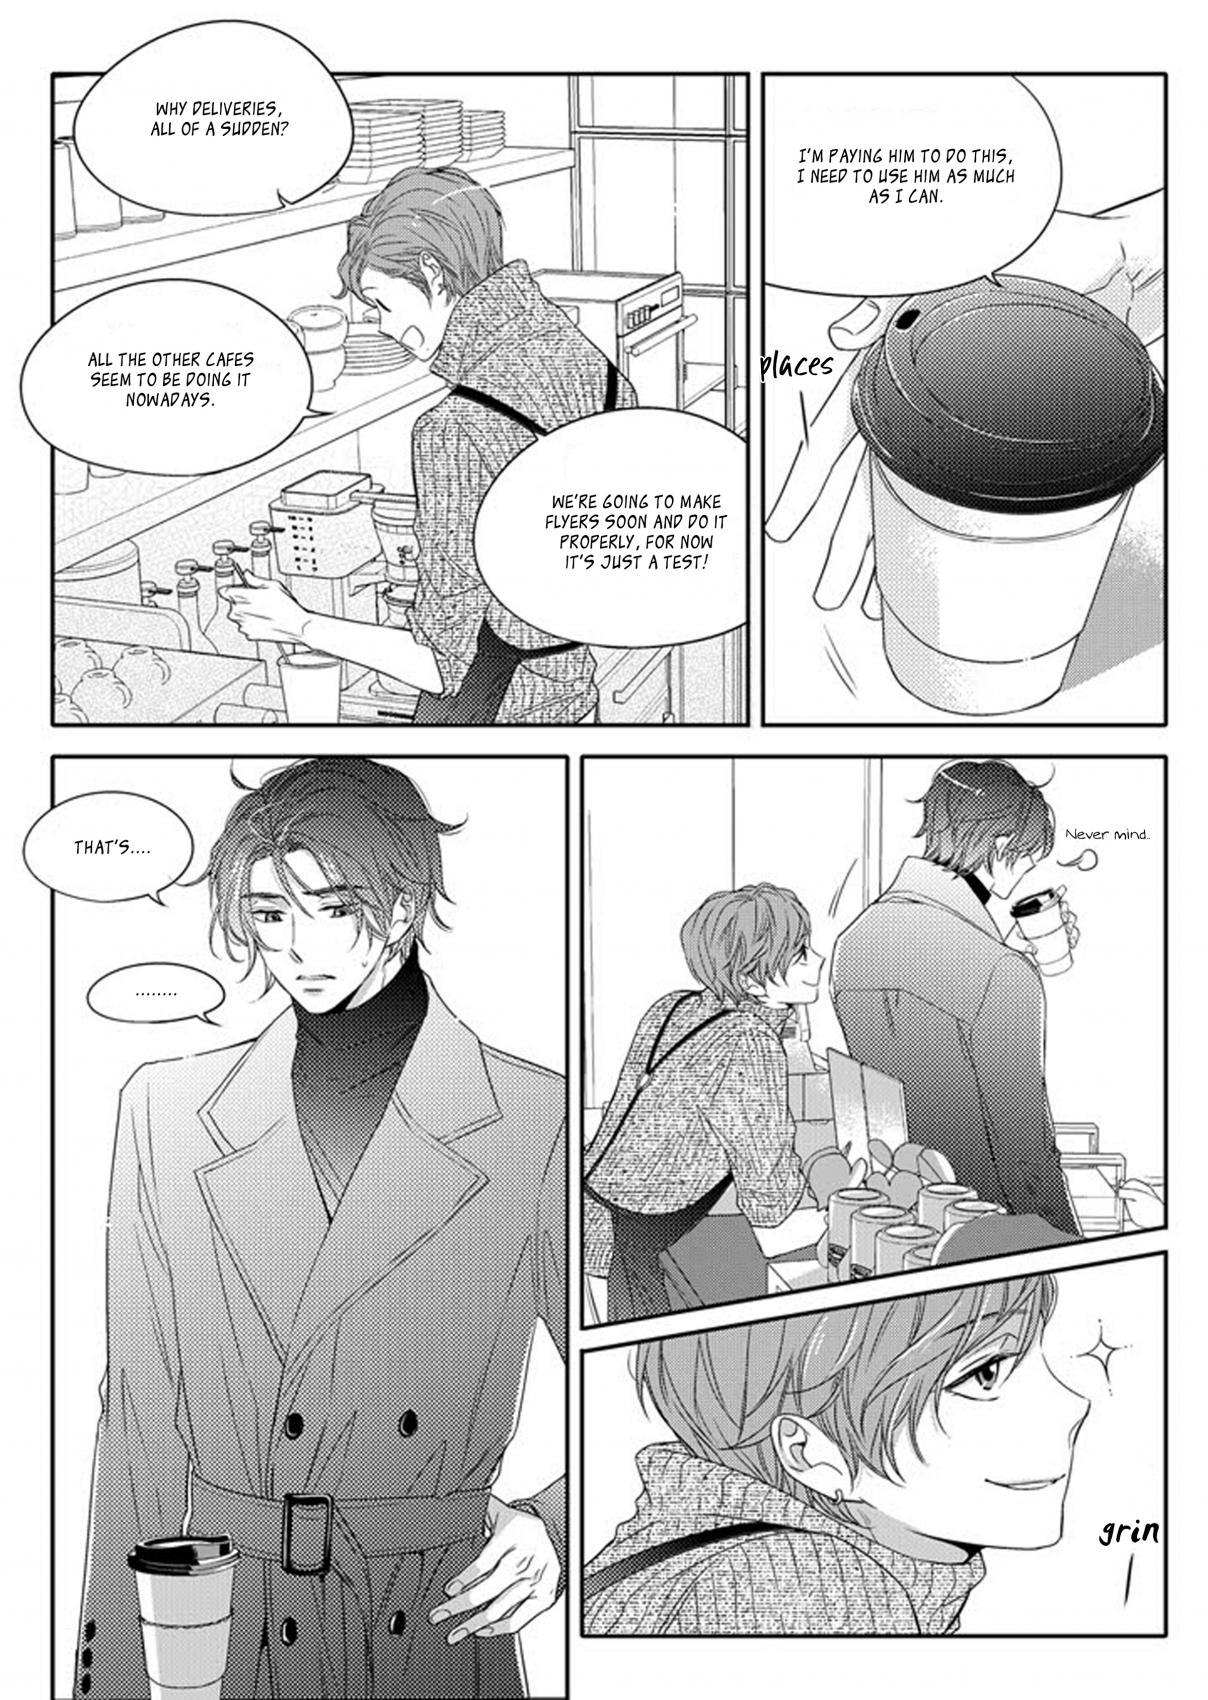 Unintentional Love Story Ch. 7